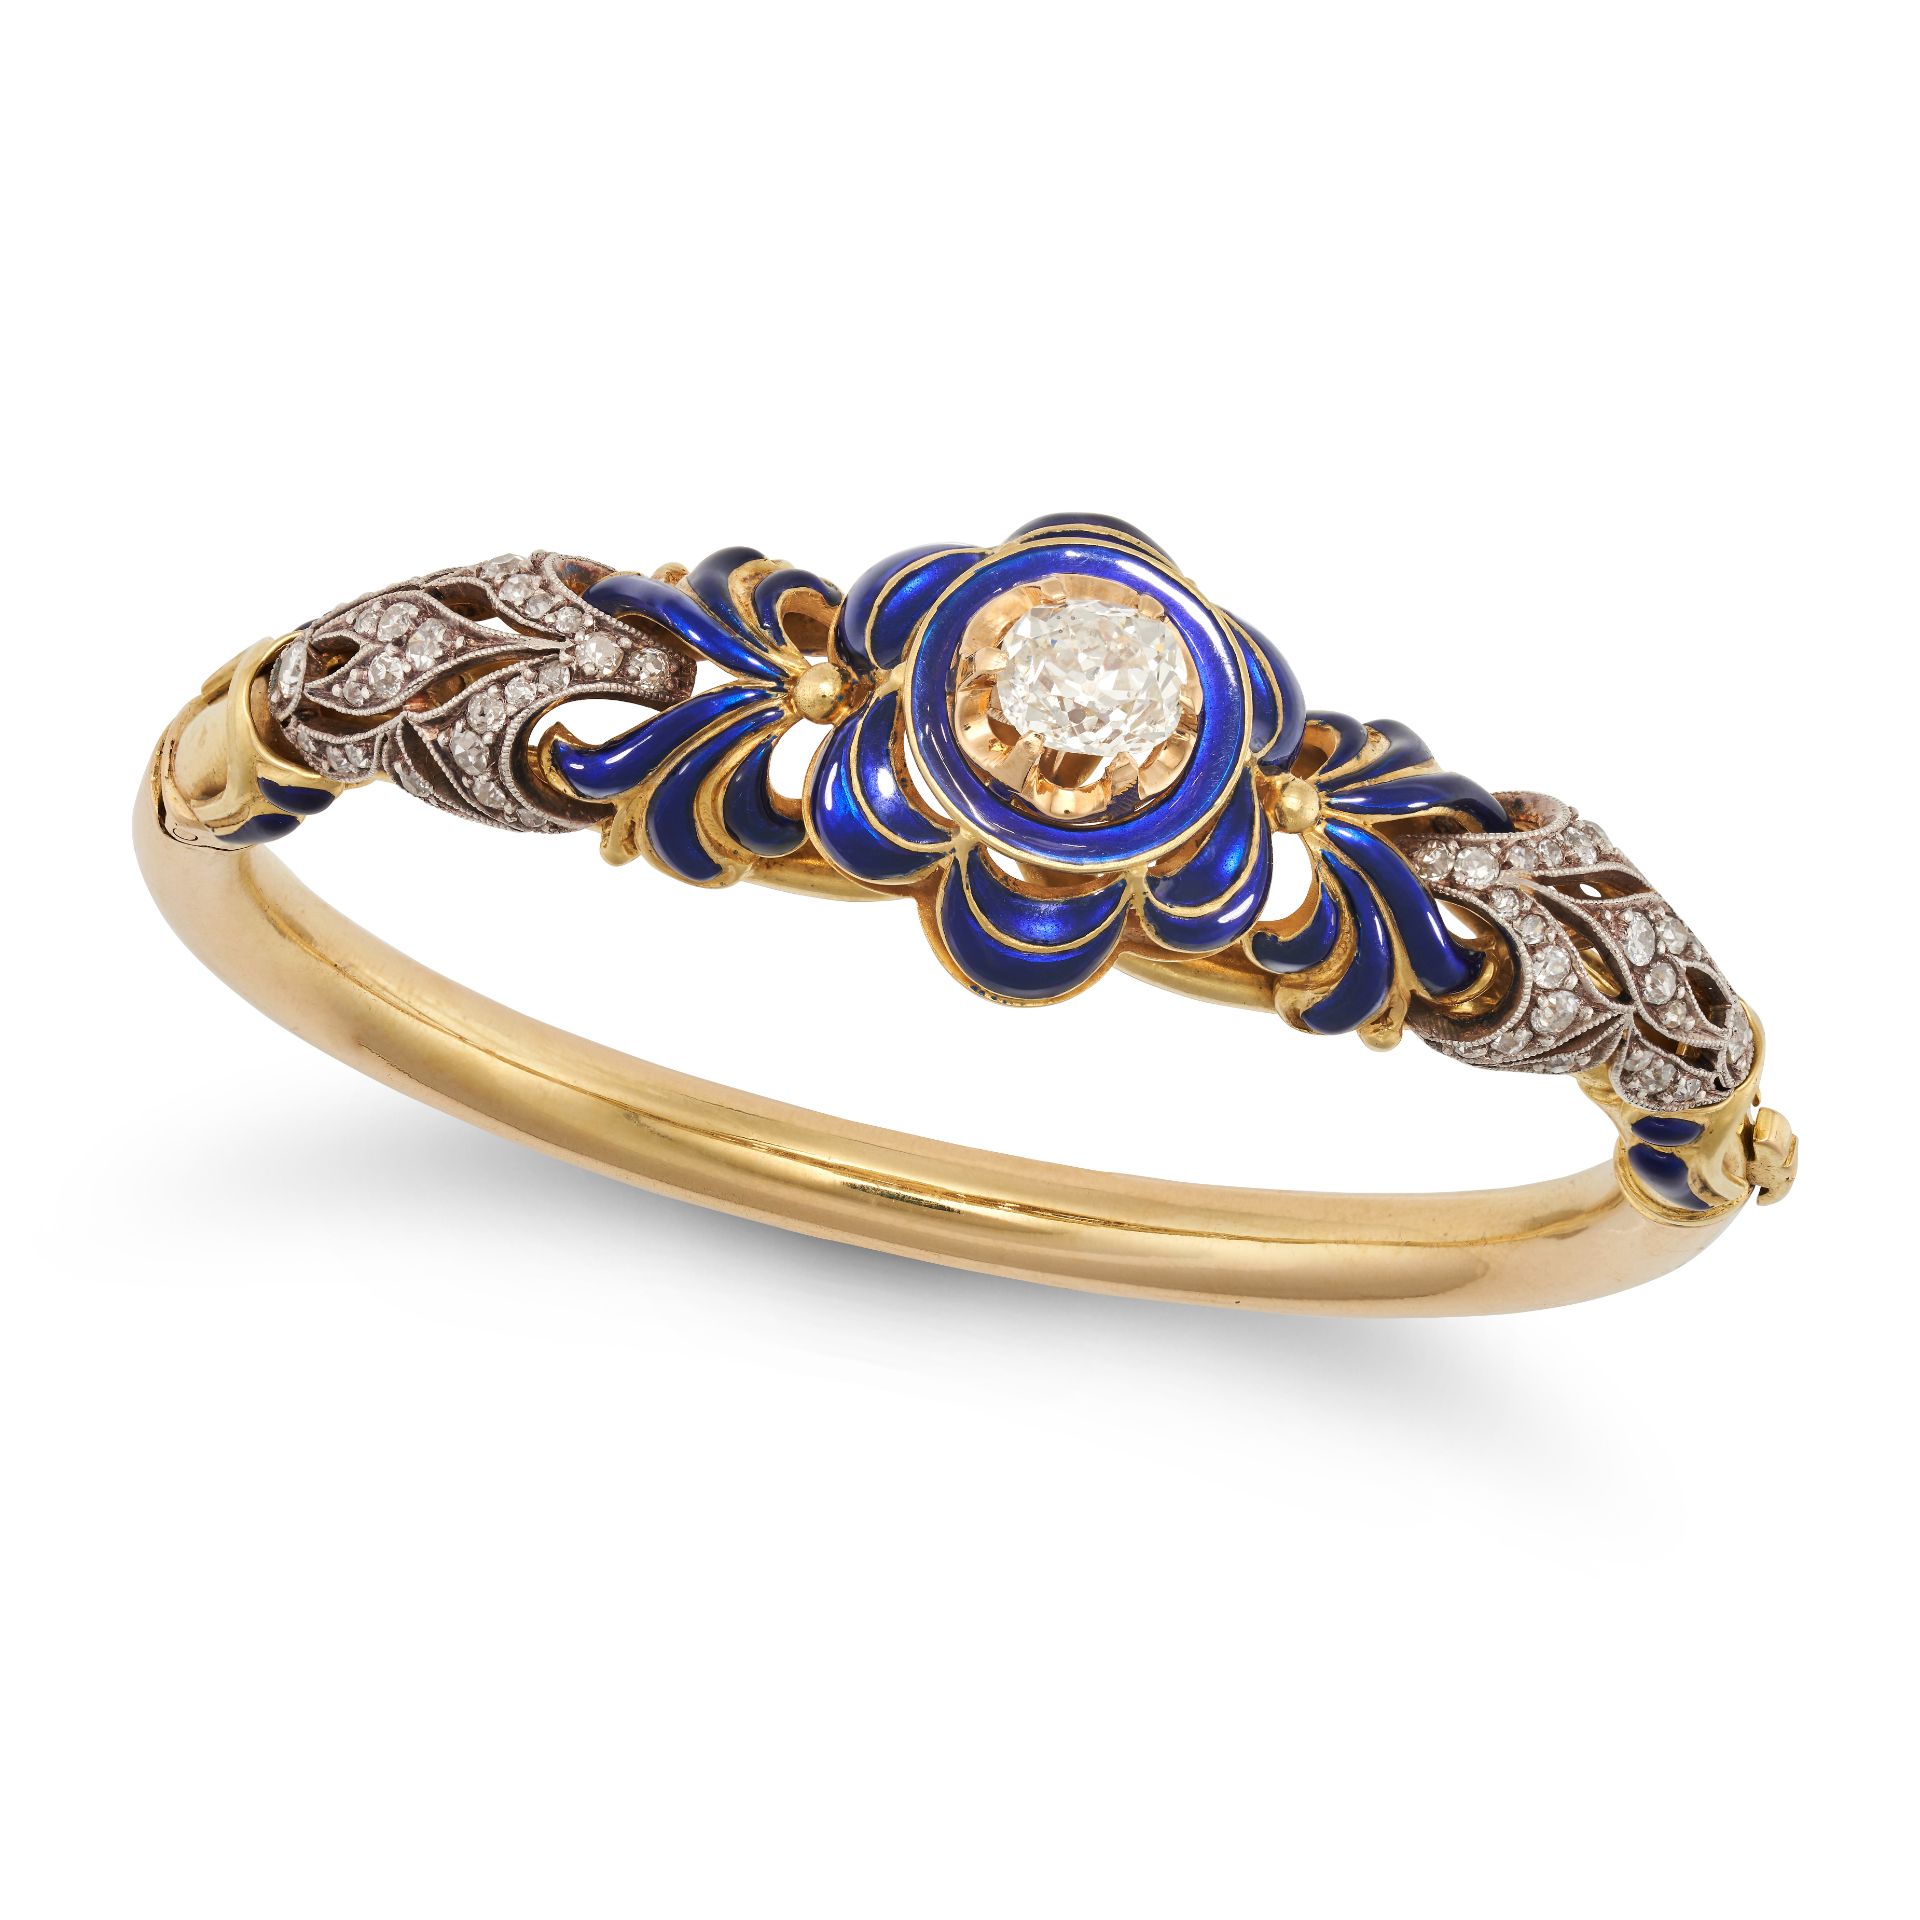 AN ANTIQUE DIAMOND AND ENAMEL BANGLE in yellow gold, the hinged bangle set with an old cut diamon...